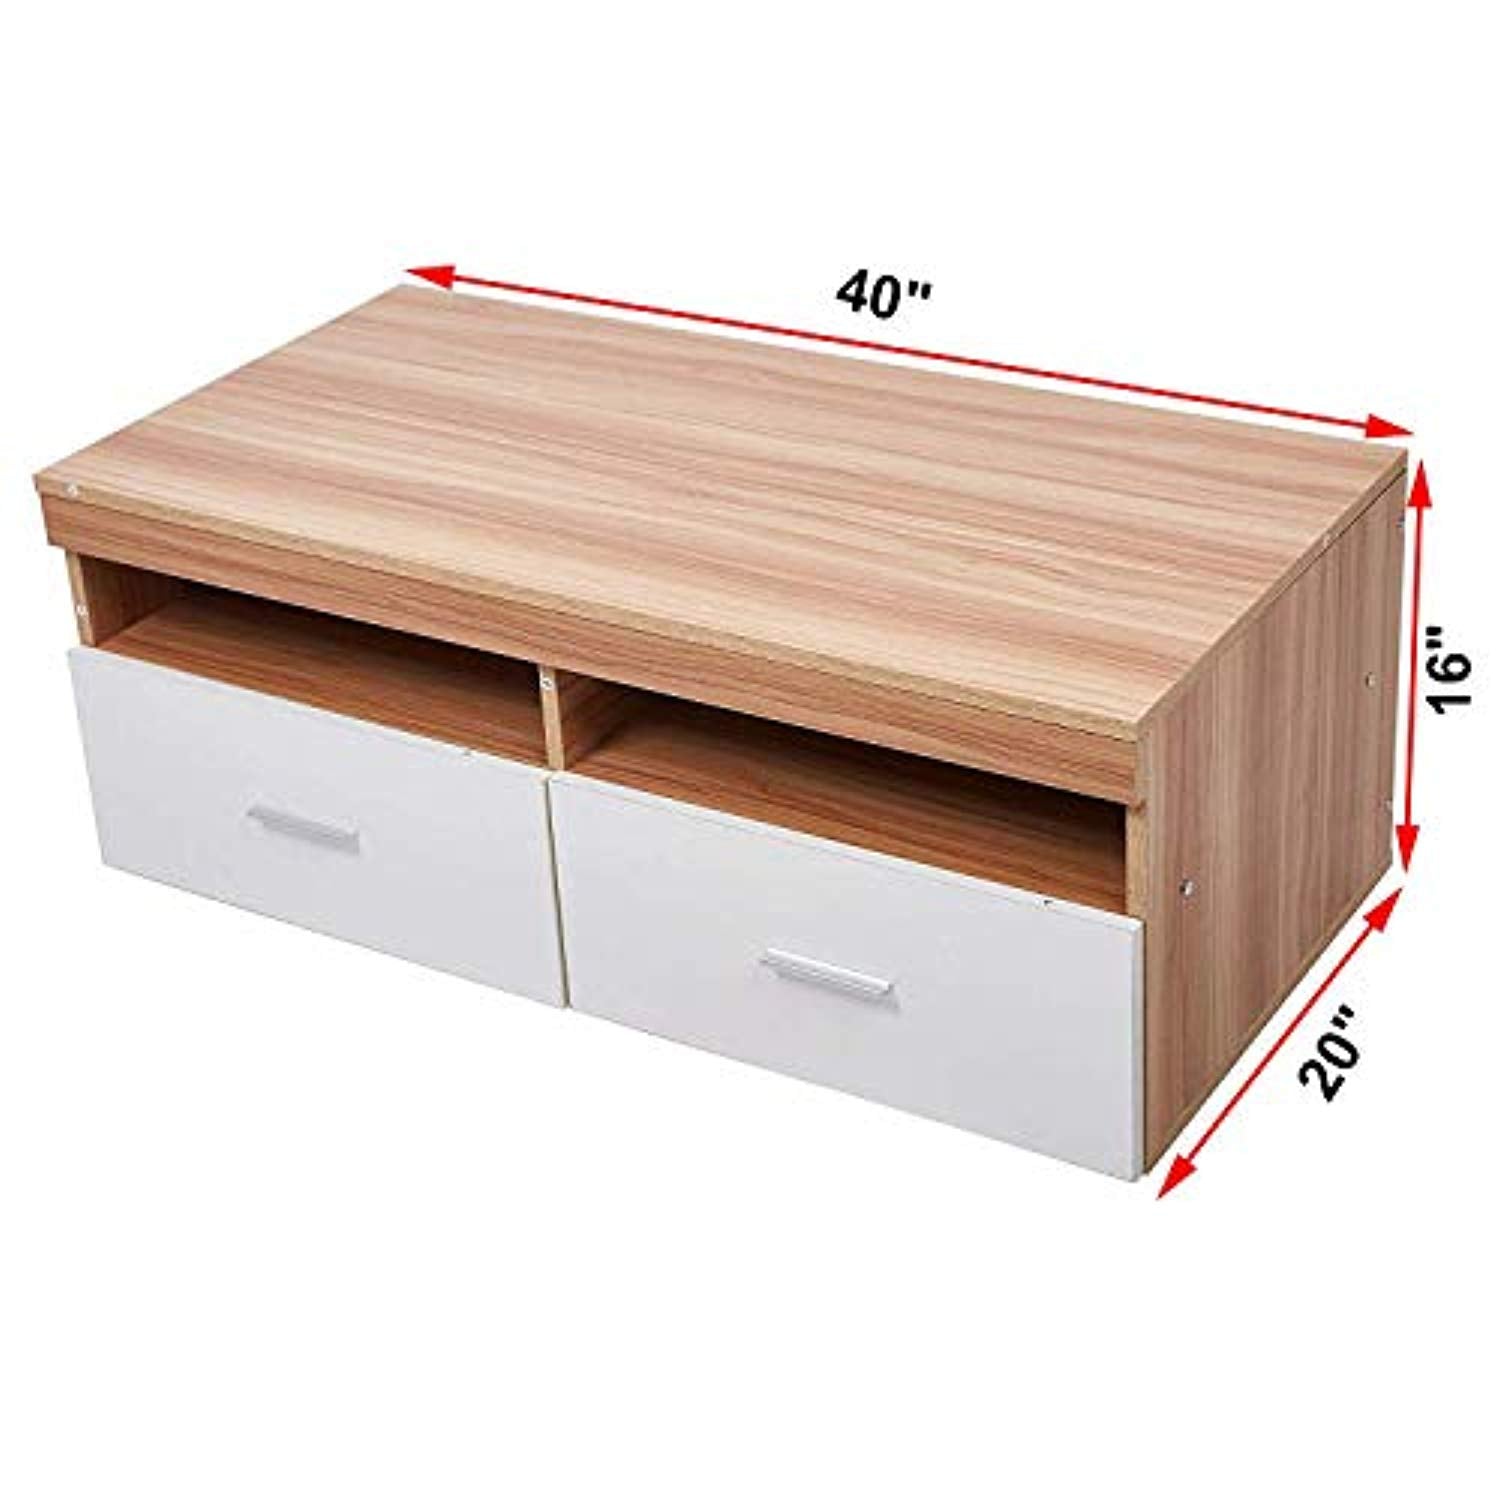 Bosonshop Wood Coffee Table with Drawers & Storage Compartments, for Living Room, Oak&White